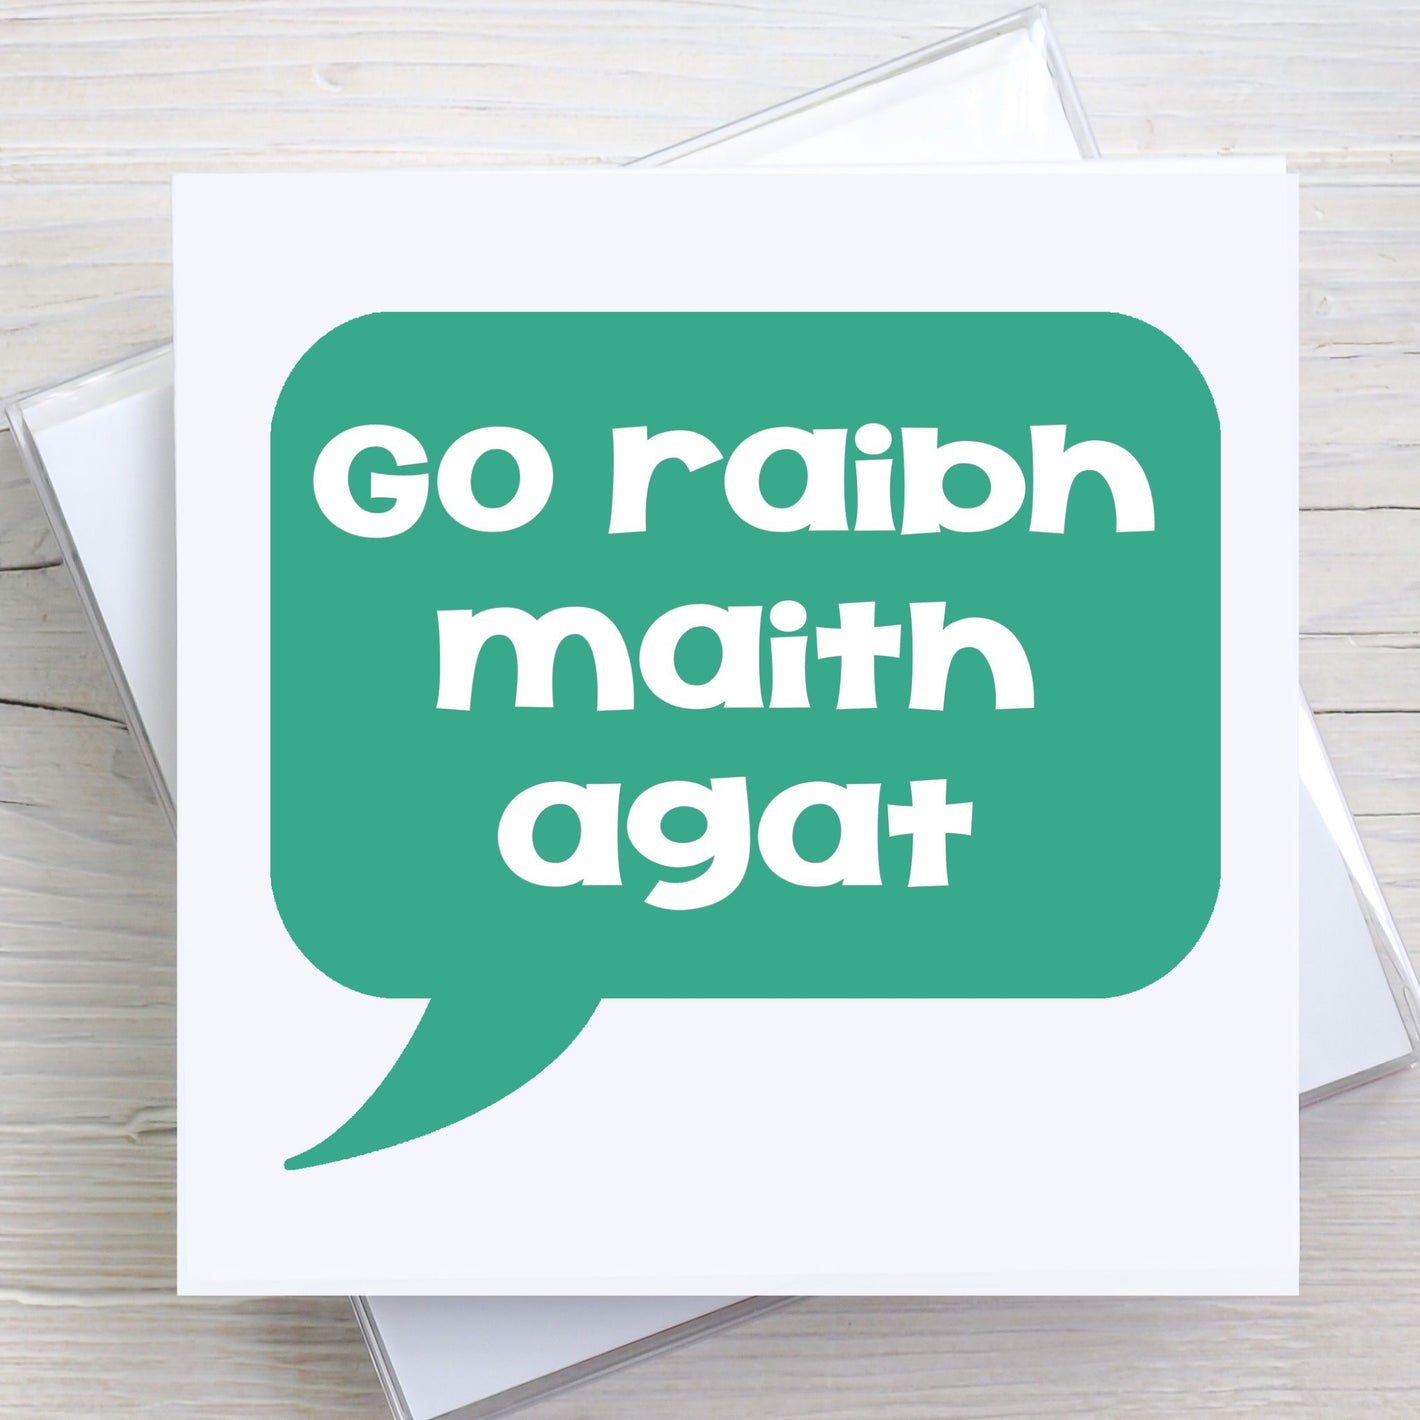 Irish greeting card with words Go Raibh Maith Agat written in a green speech bubble.  Translates to Thank You, as gaeilge.